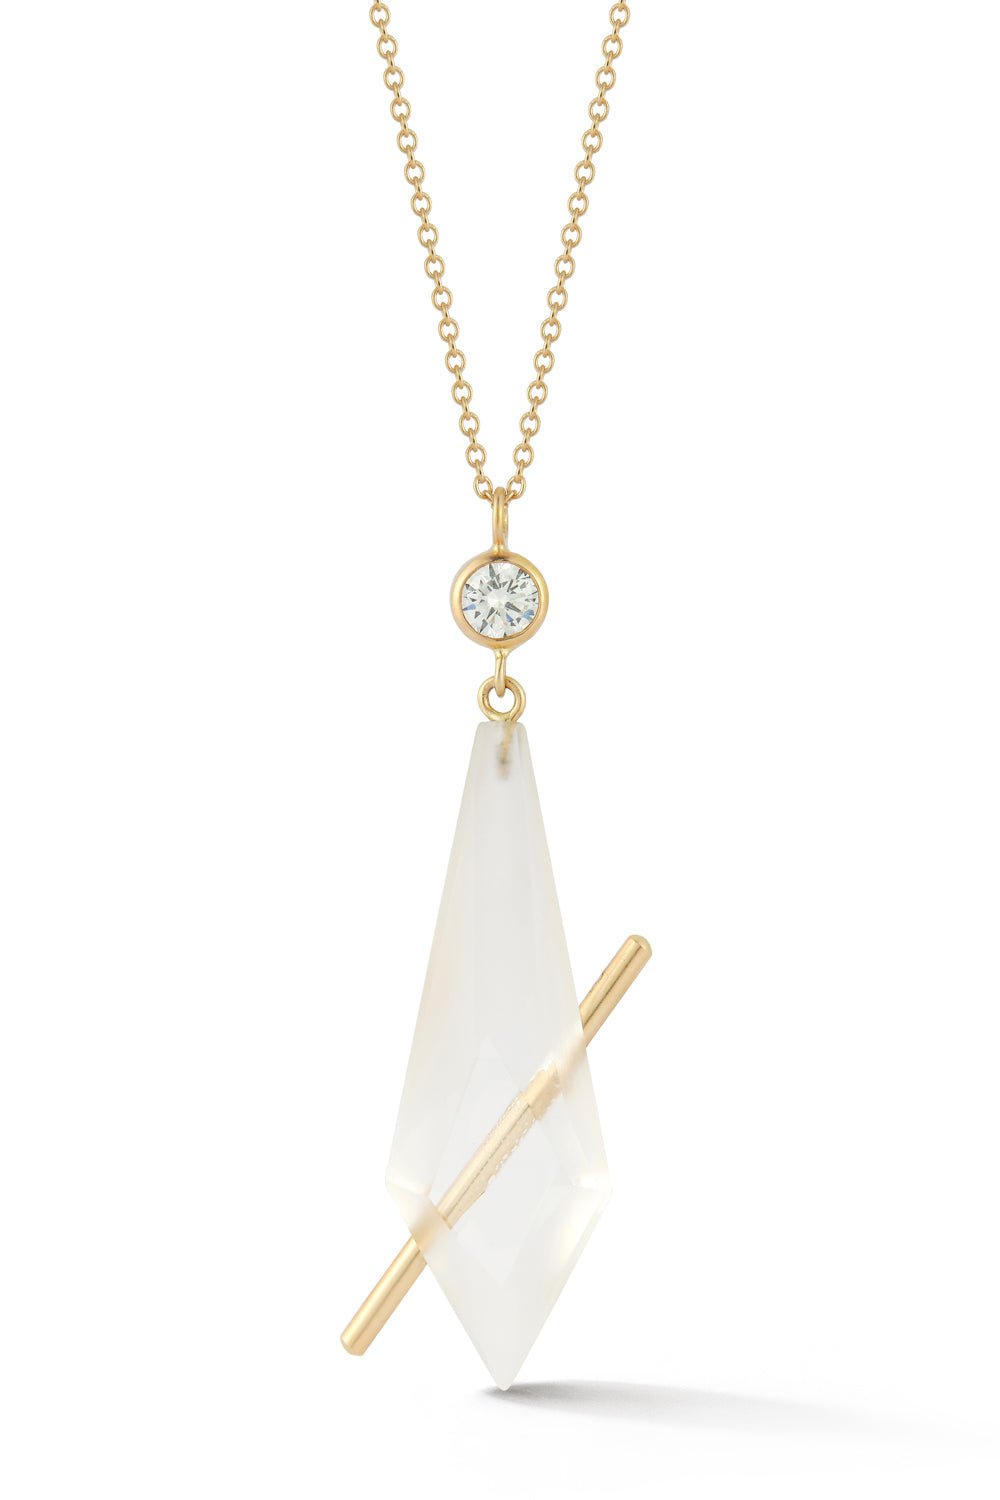 OLIVIA SHIH-Lucid Crystal Pendant Necklace-RECYCLED GOLD (WHEN POSSIBLE)